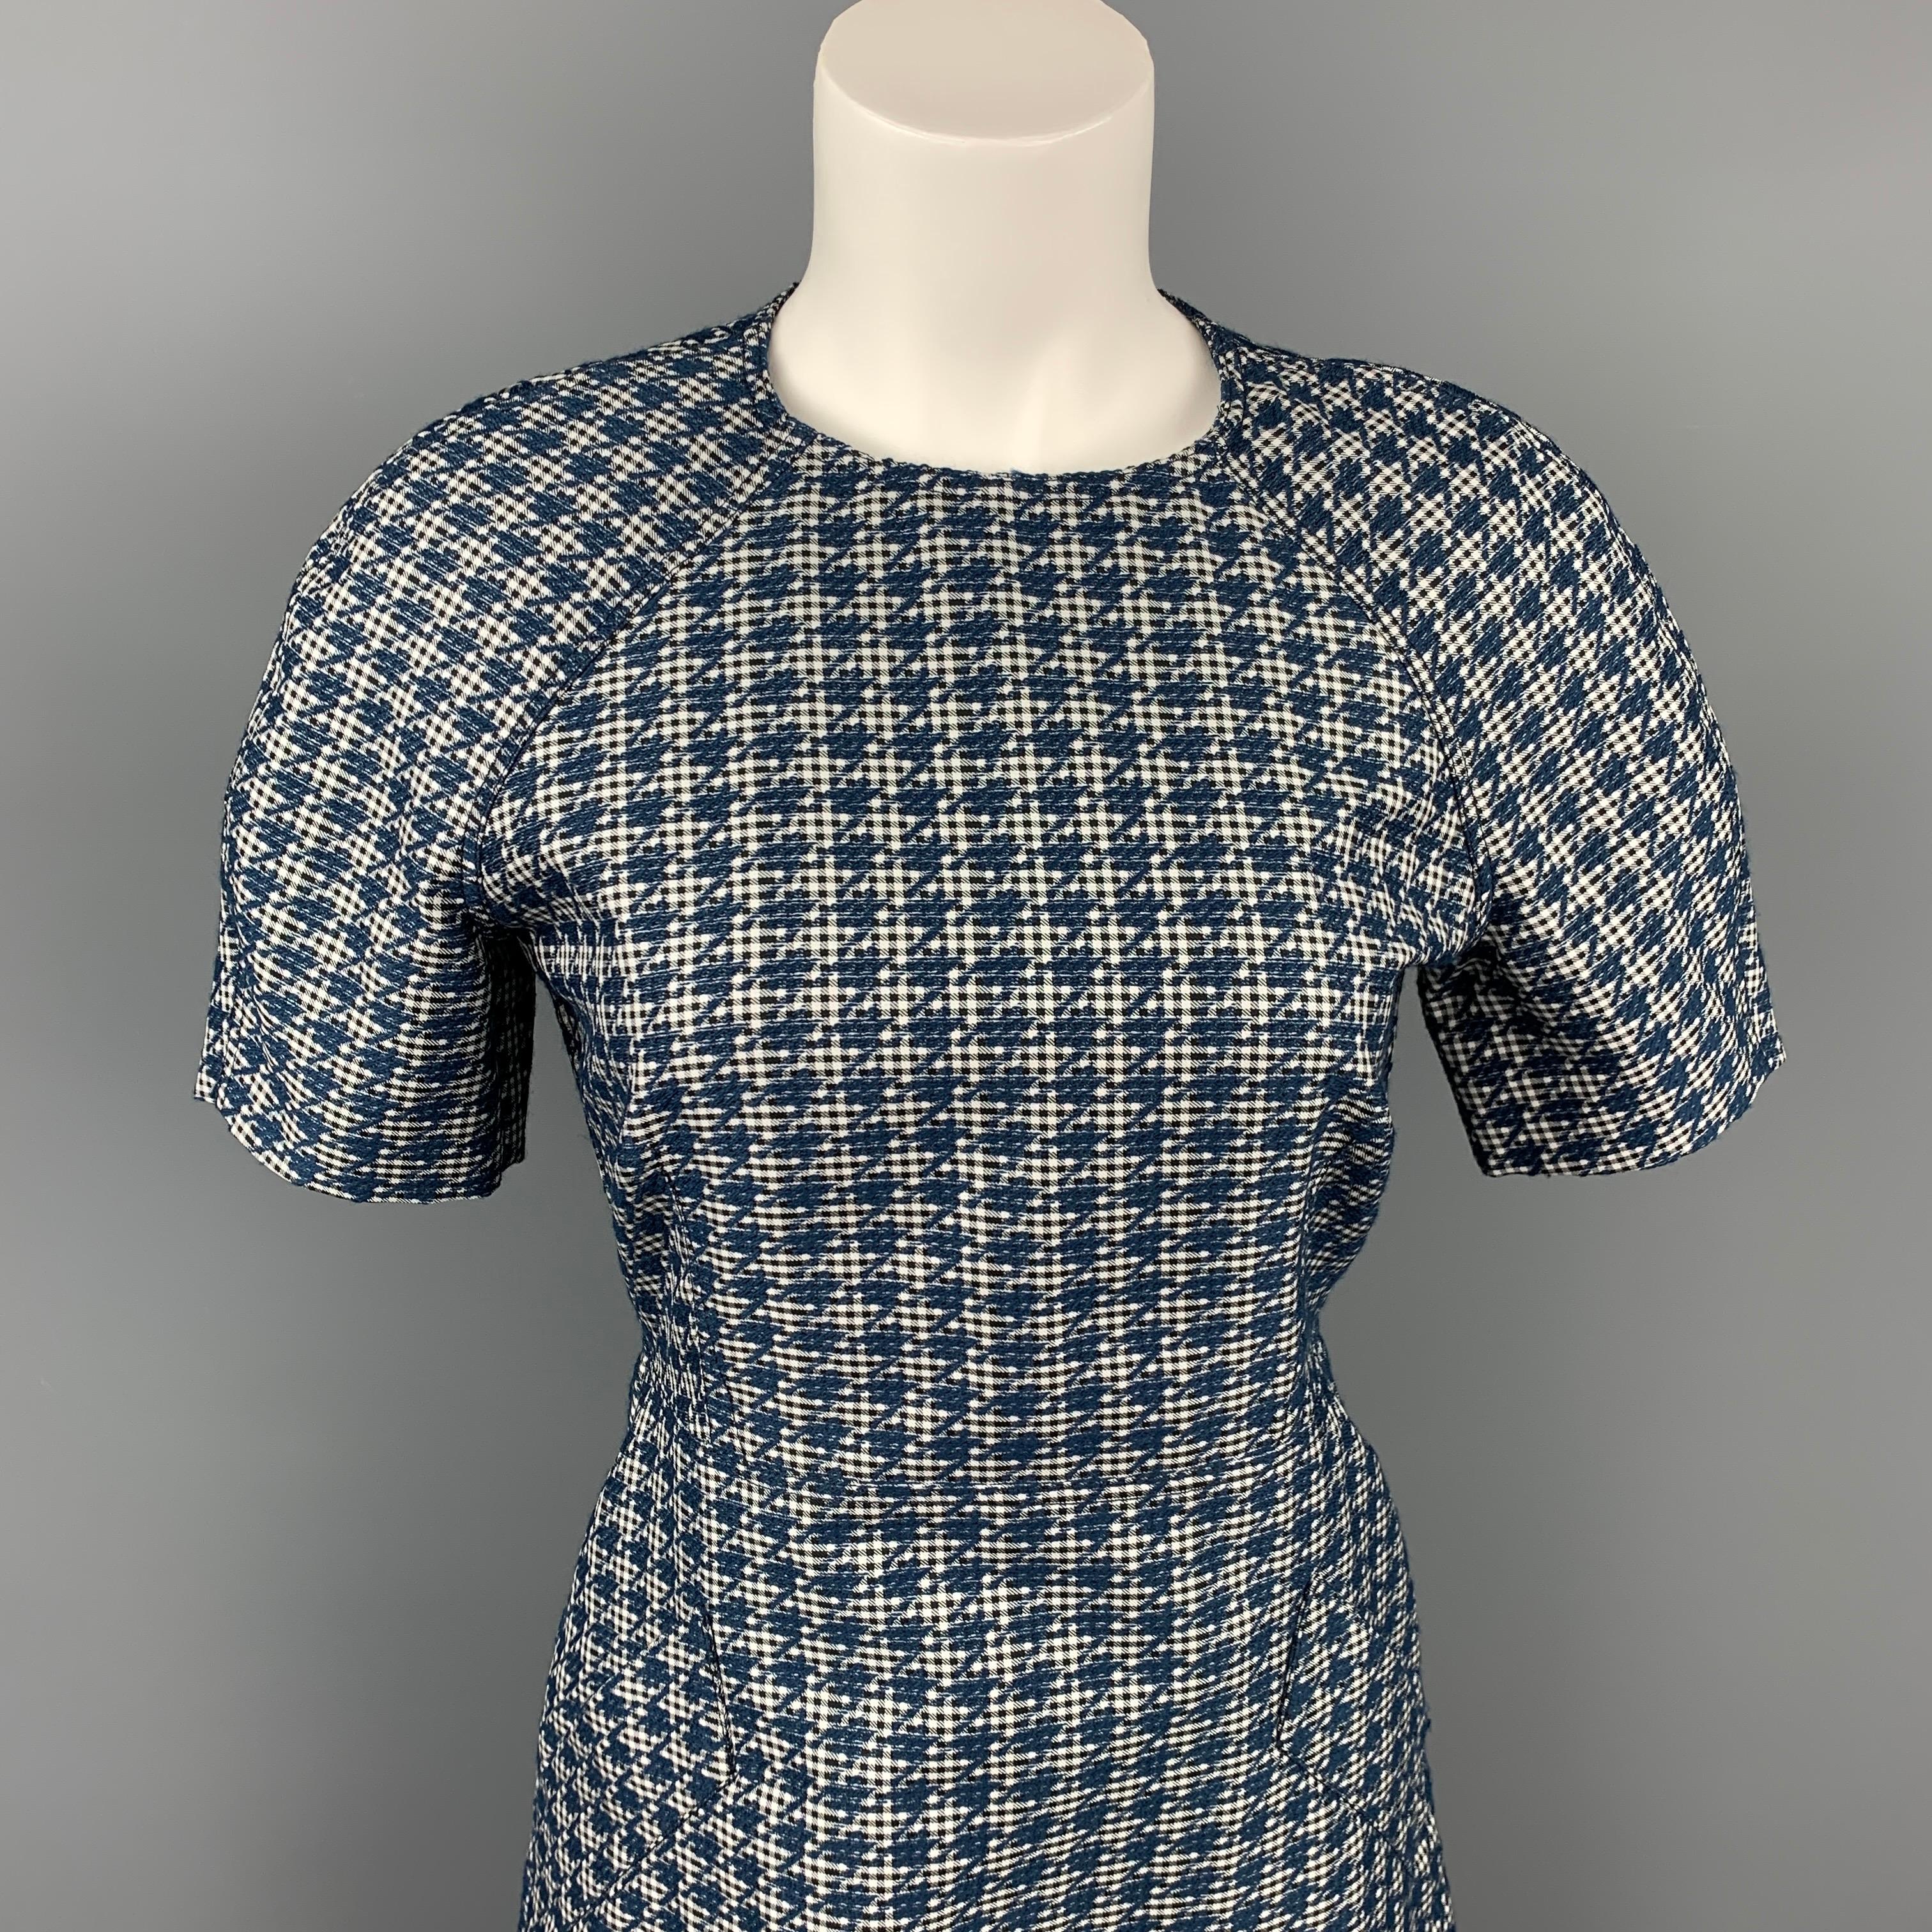 MAISON KITSUNE dress comes in a blue gingham polyester blend with a full liner featuring an a-line style, slit pockets, and a back zip up closure. 

Very Good Pre-Owned Condition.
Marked: 36

Measurements:

Shoulder: 17 in.
Bust: 32 in.
Waist: 28